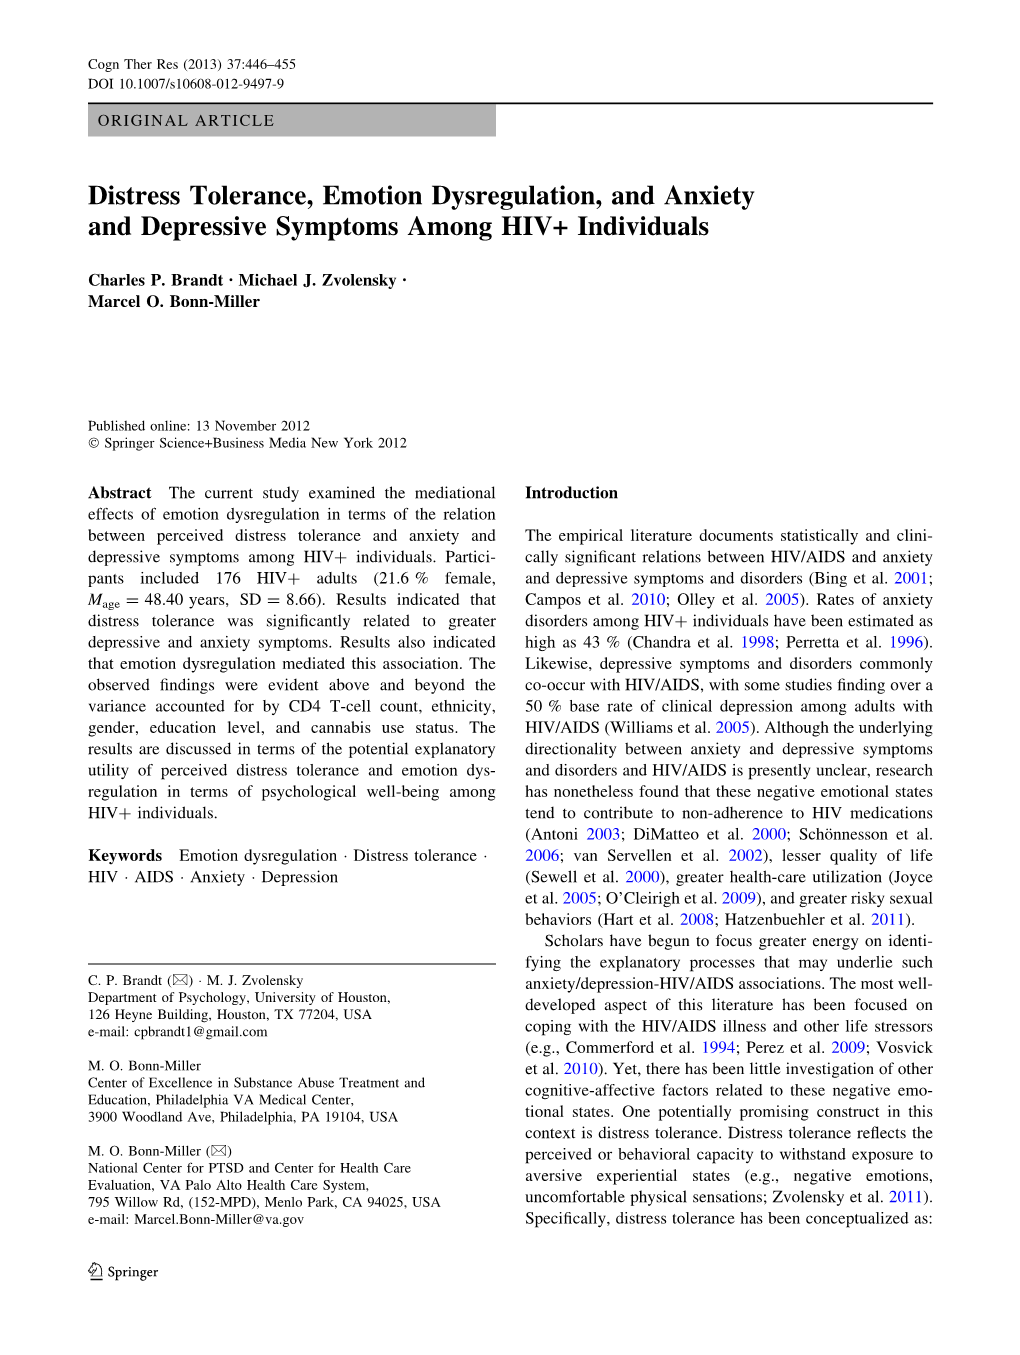 Distress Tolerance, Emotion Dysregulation, and Anxiety and Depressive Symptoms Among HIV+ Individuals